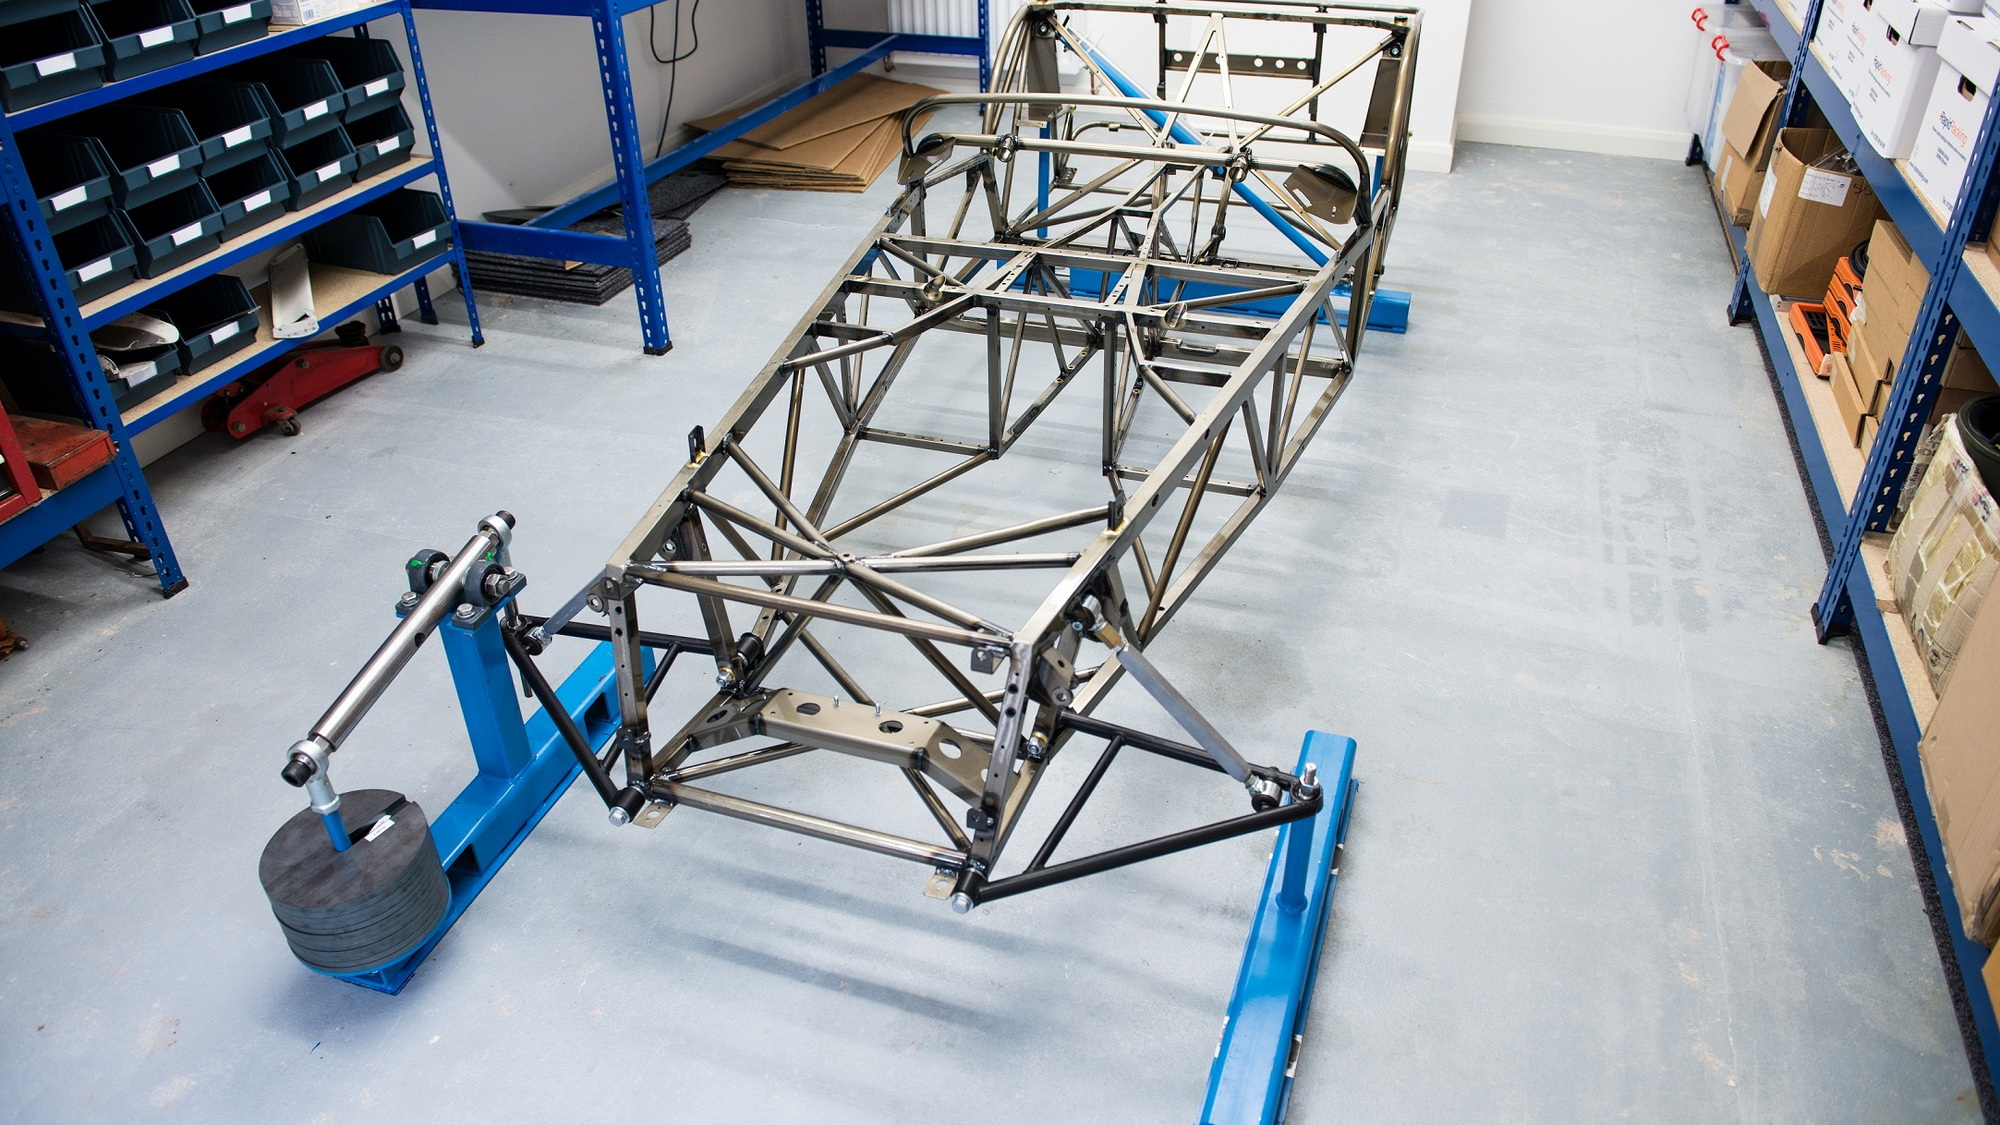 Caterham builds lighter Seven chassis using bicycle “butted tubing” technology